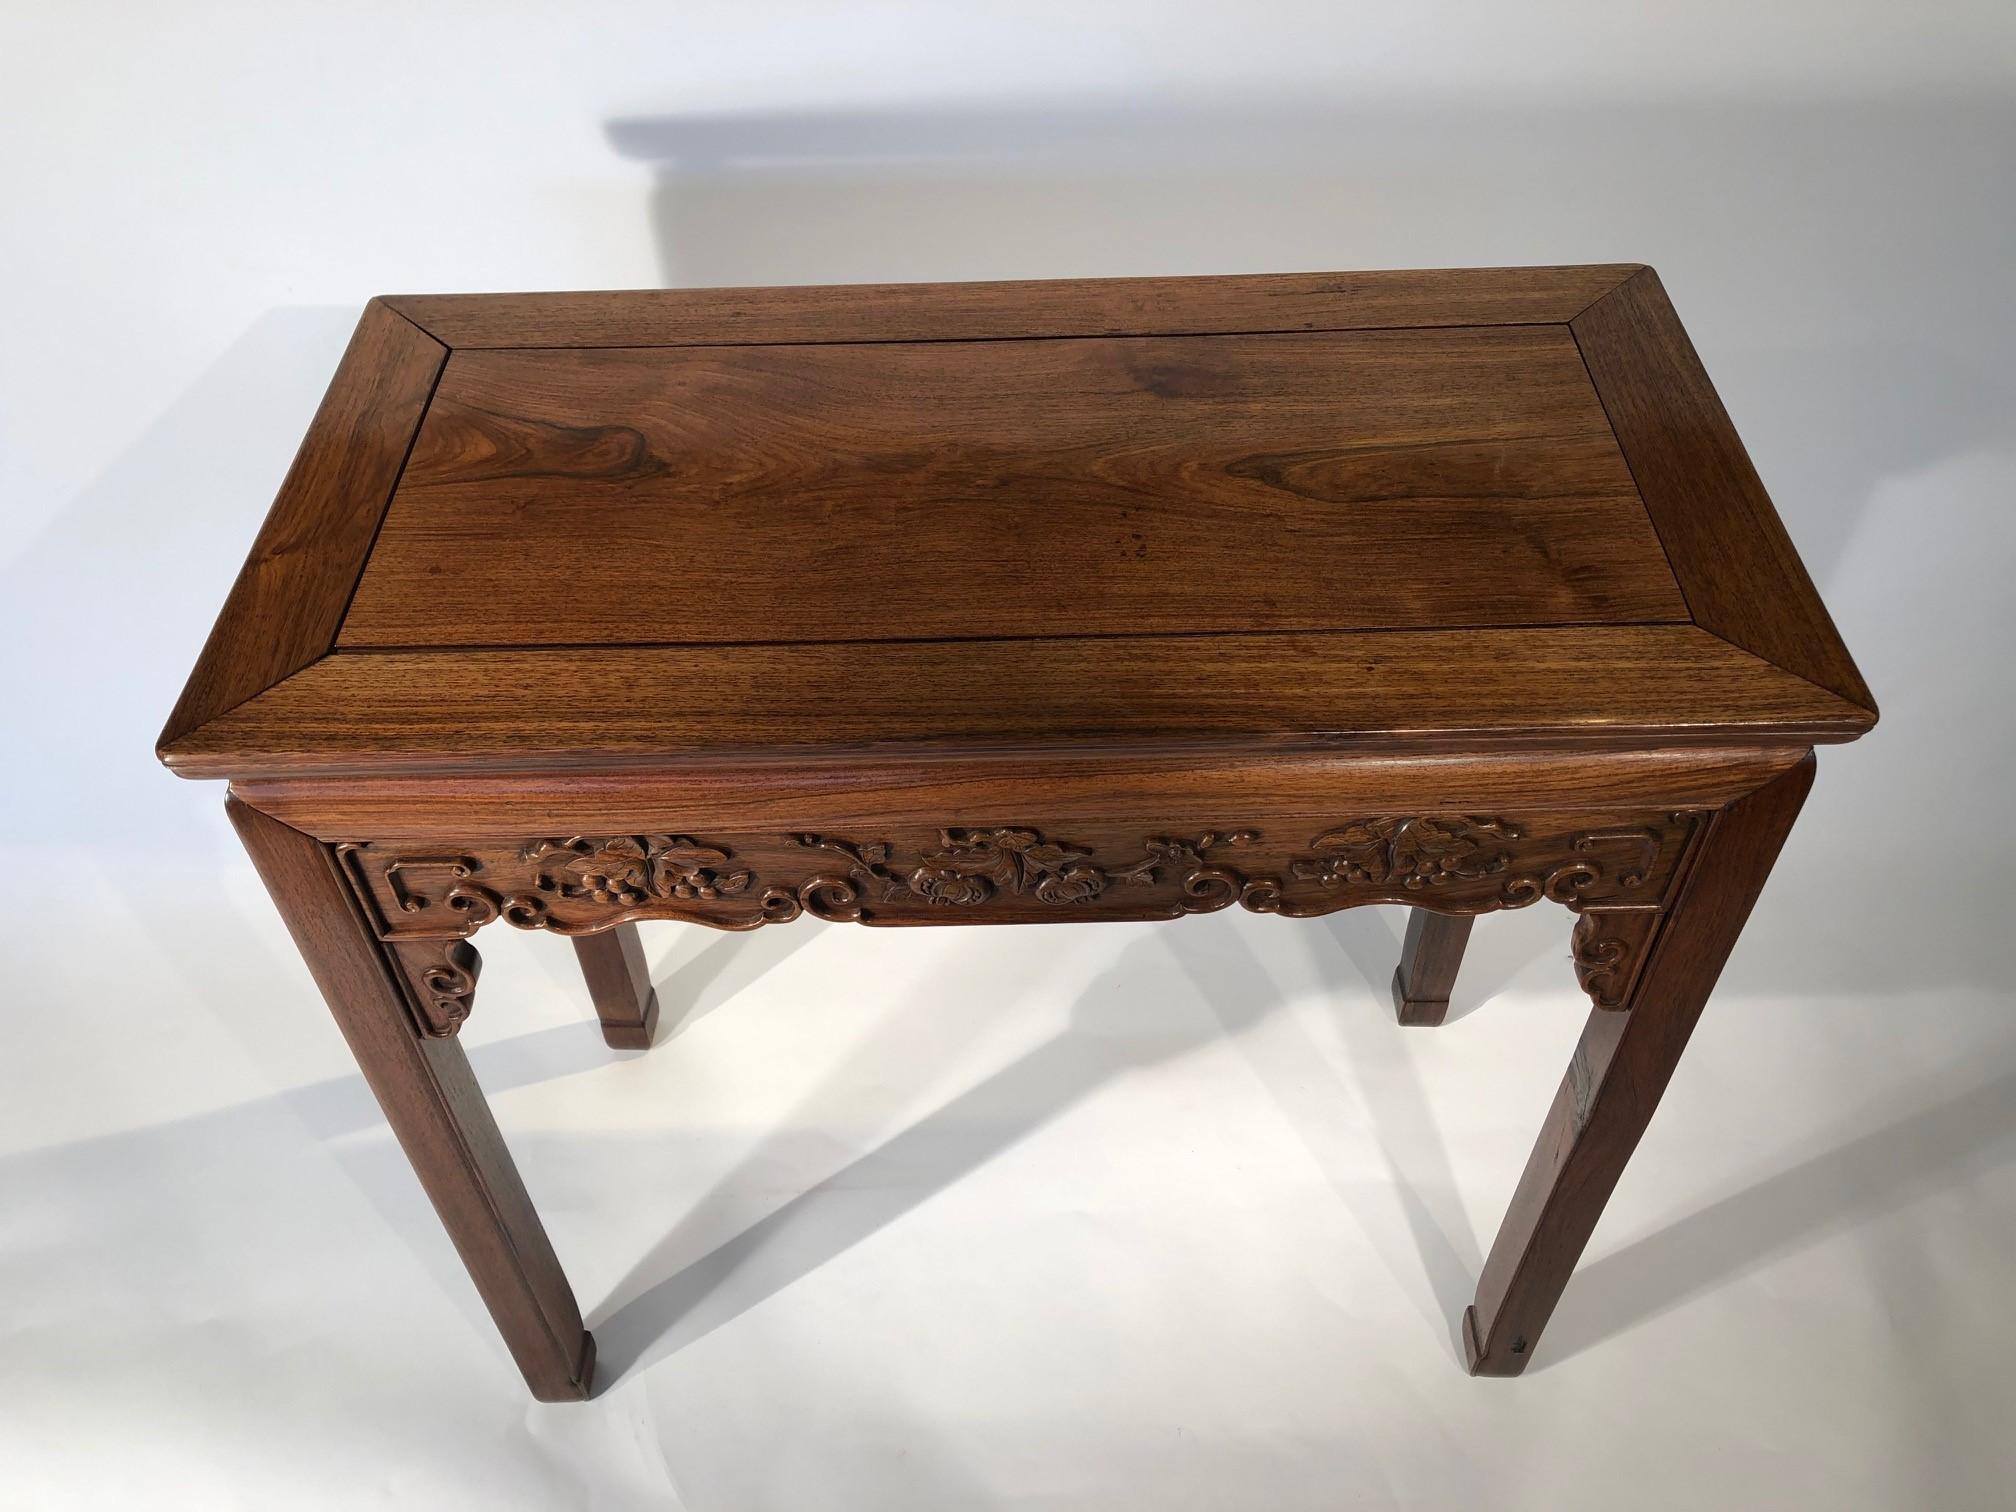 A fine quality Chinese hardwood altar table. The whole has an excellent faded color.